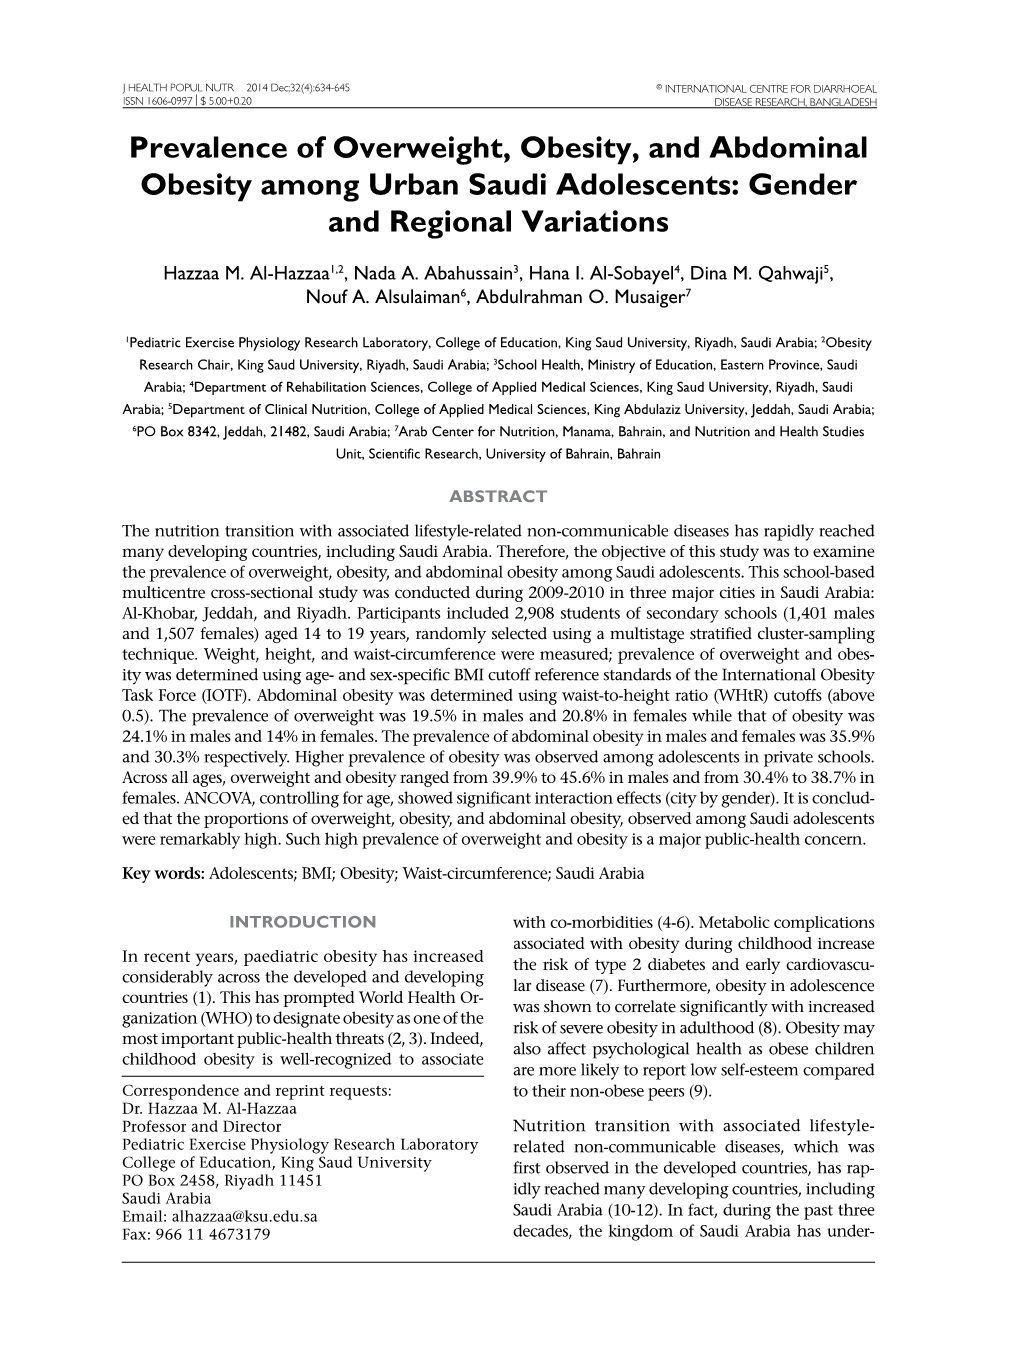 Prevalence of Overweight, Obesity, and Abdominal Obesity Among Urban Saudi Adolescents: Gender and Regional Variations